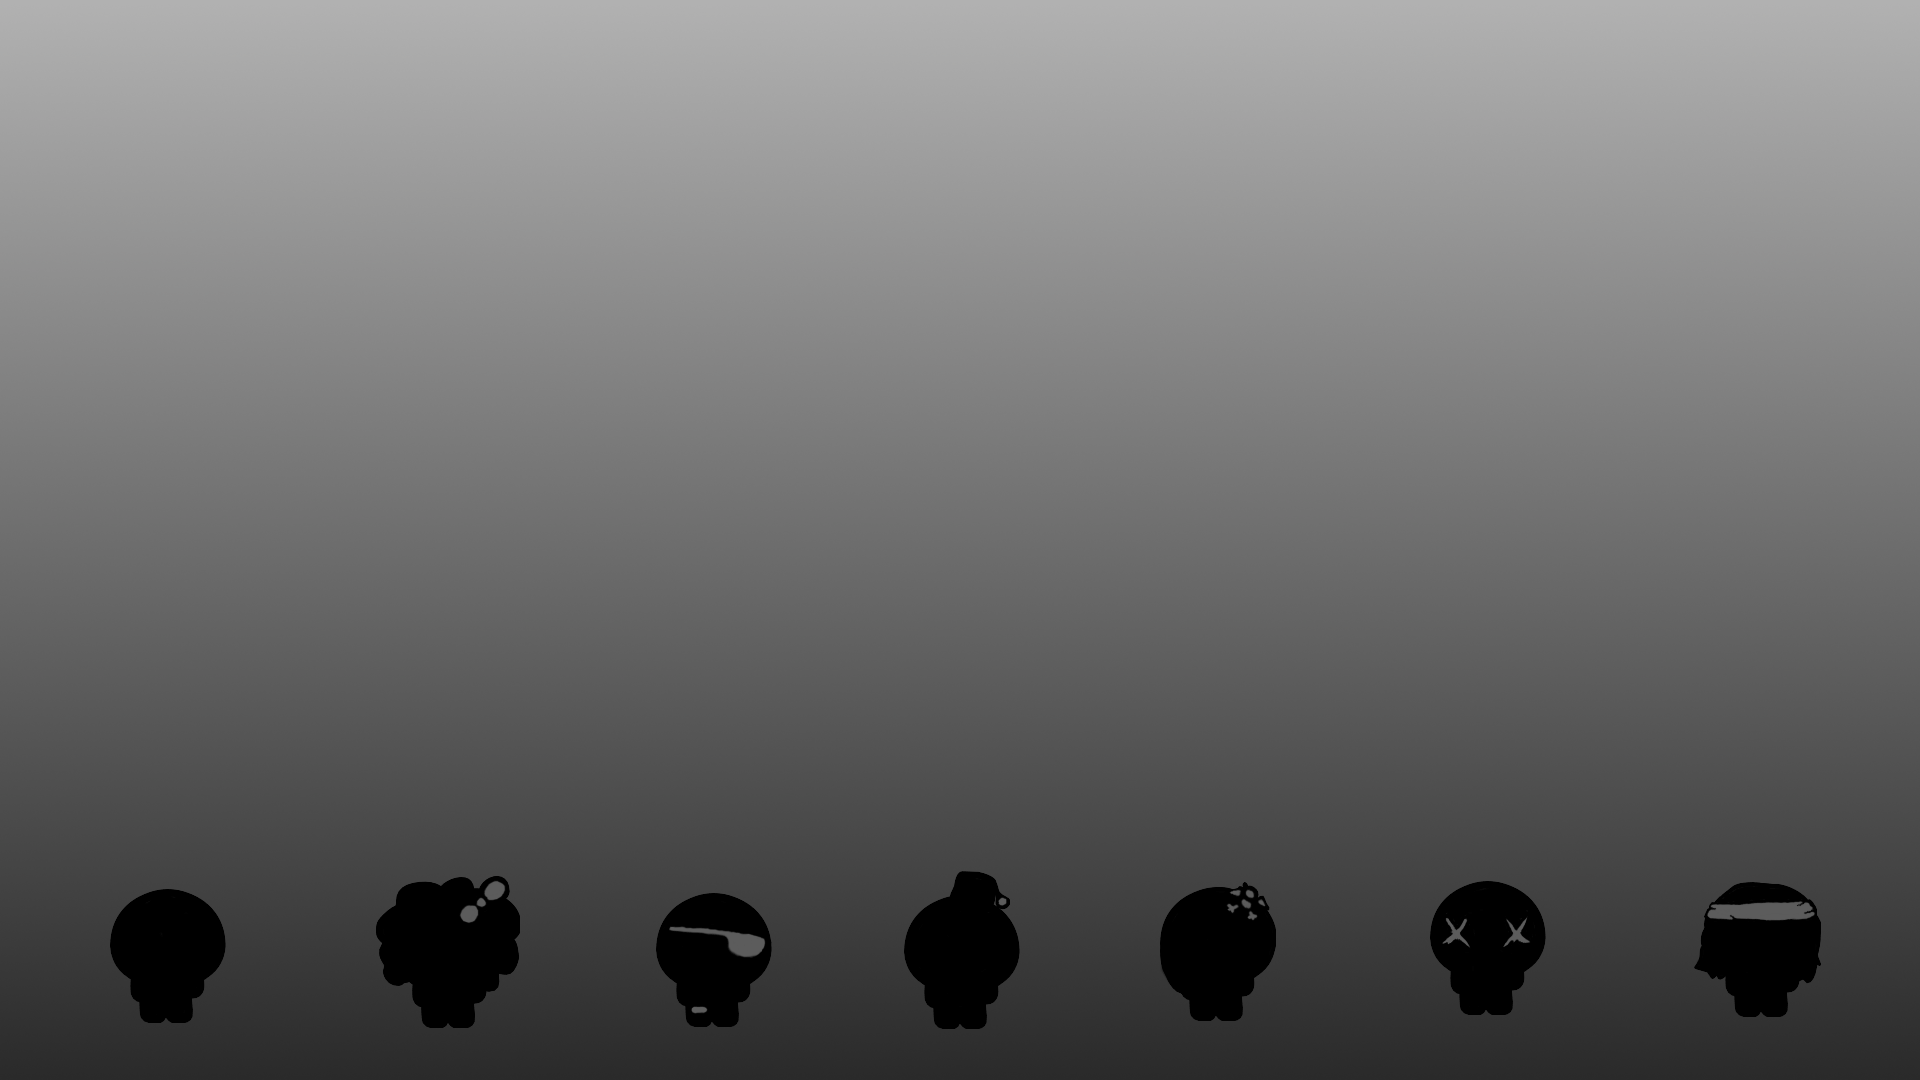 I decided to make a somewhat minimalist wallpaper. It's also easy